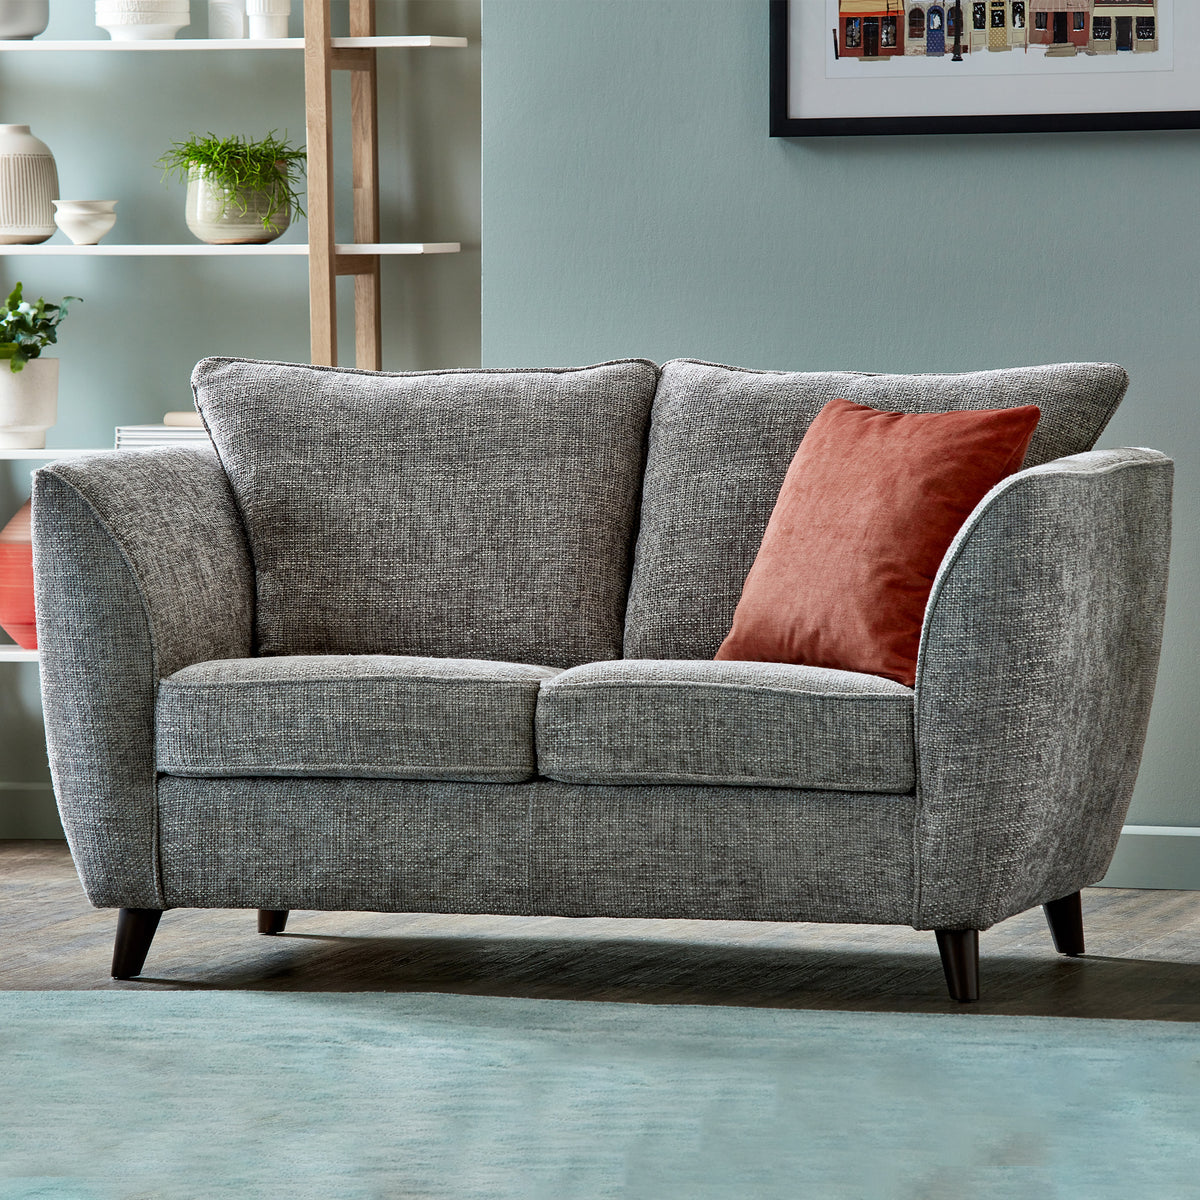 Tamsin Silver 2 Seater Sofa for living room